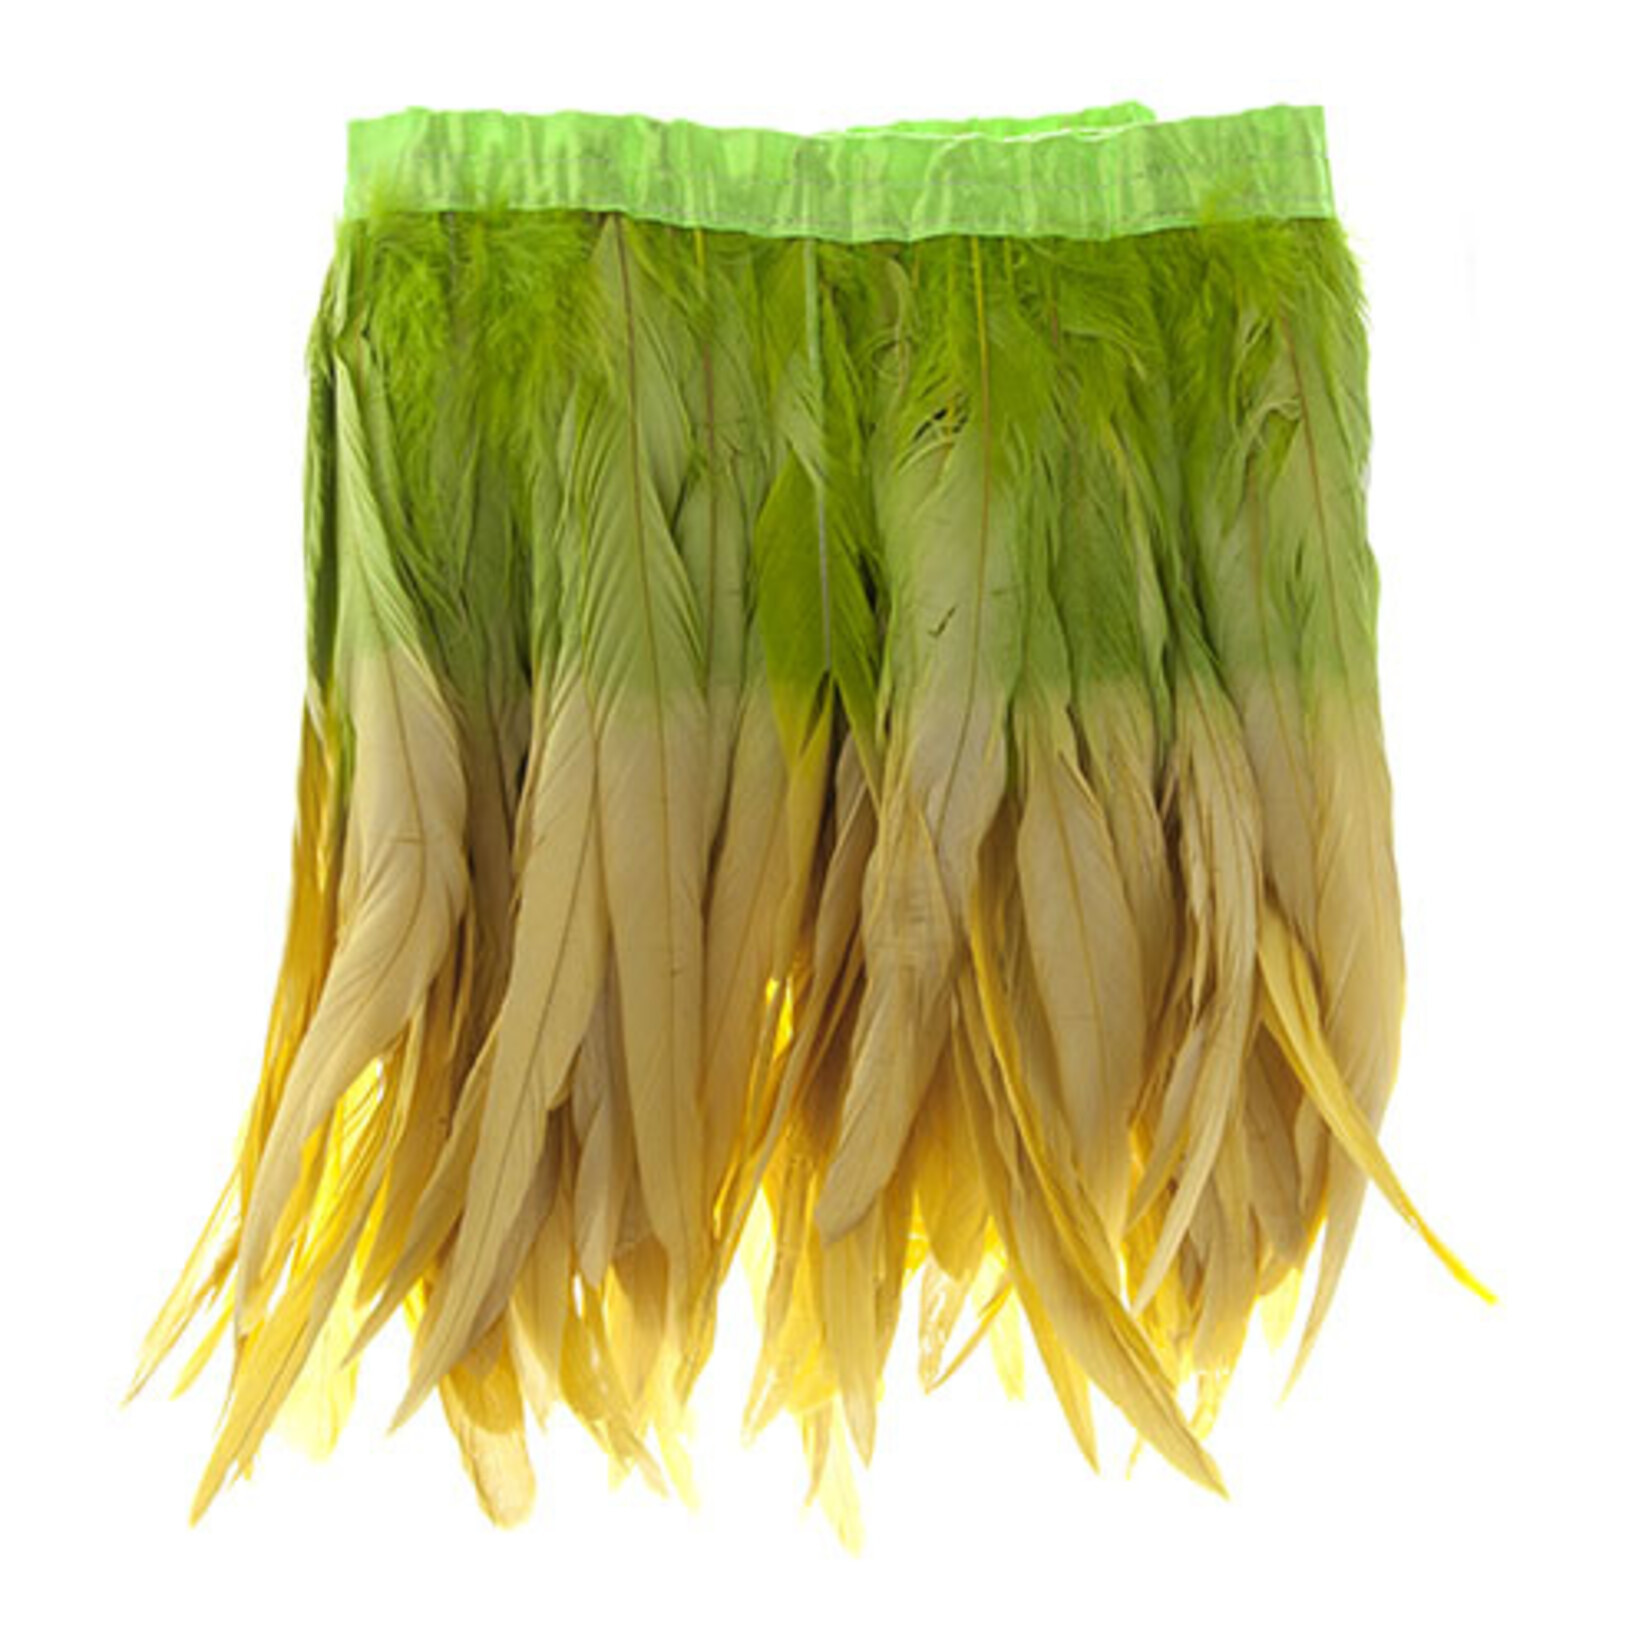 Coque Feathers Value 2 Tone 8 - 10 Inches 1 Yard  Lemon/Lime